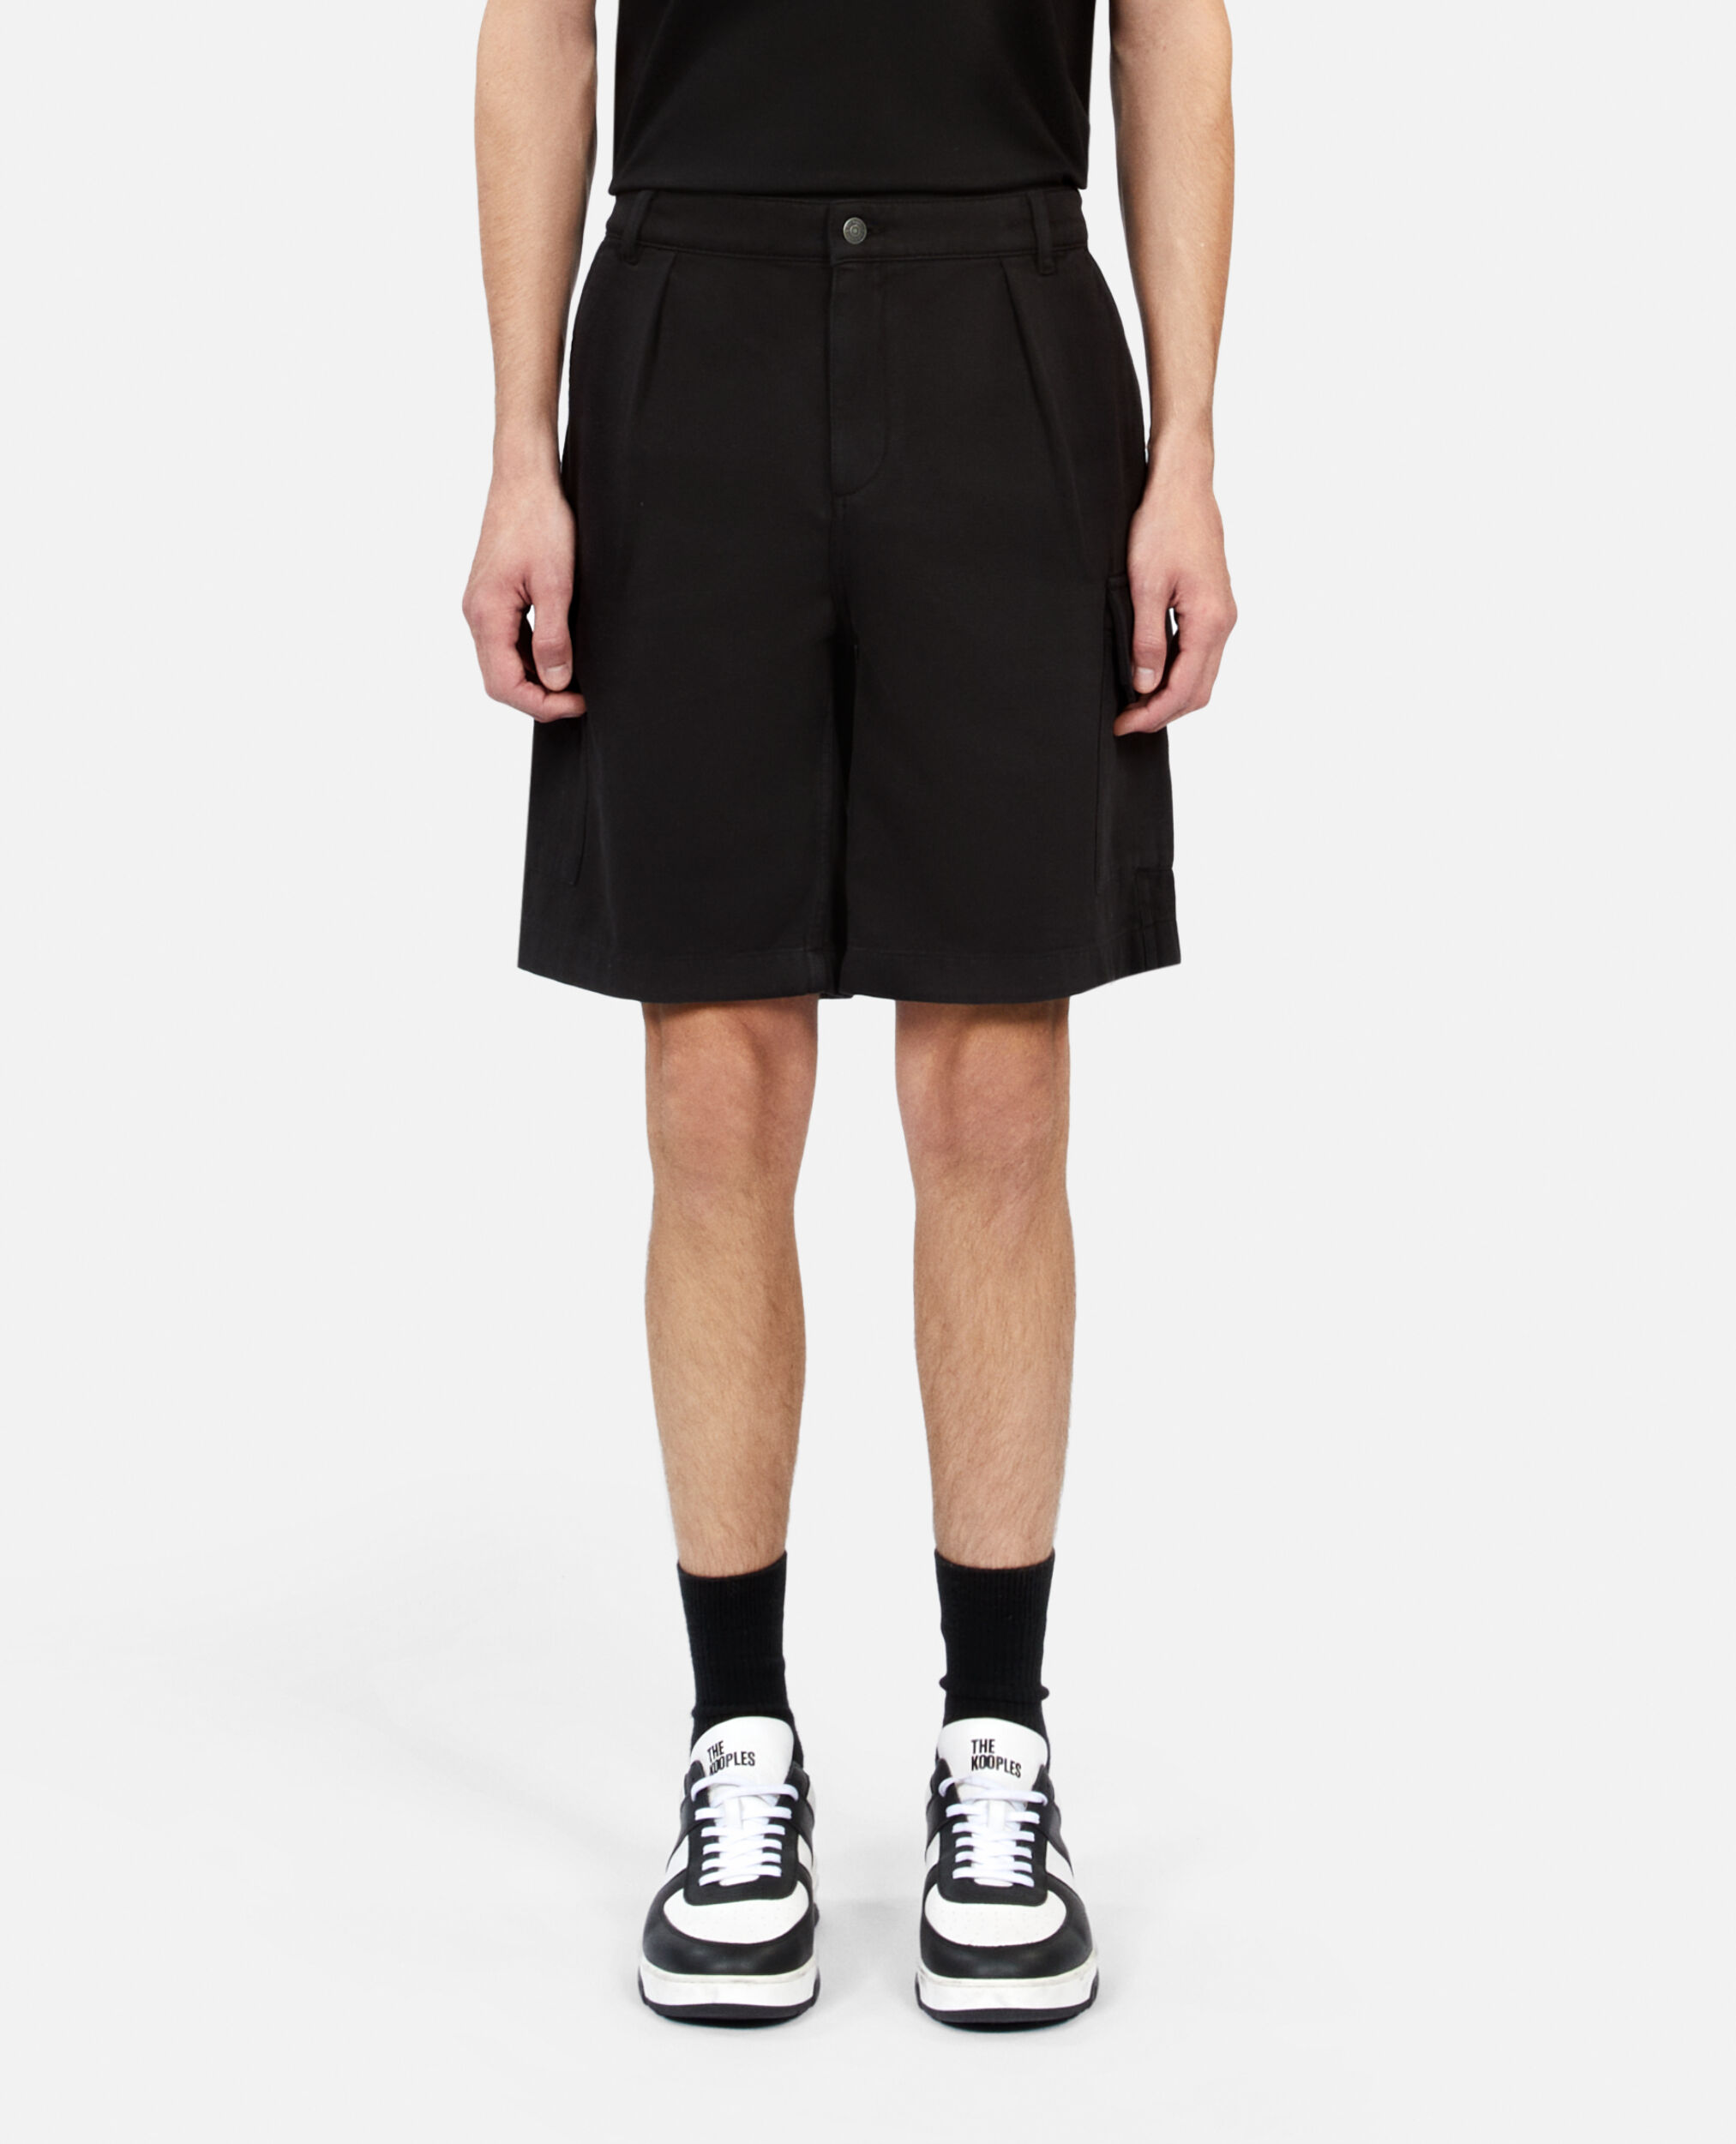 Black cotton and linen cargo shorts, BLACK, hi-res image number null